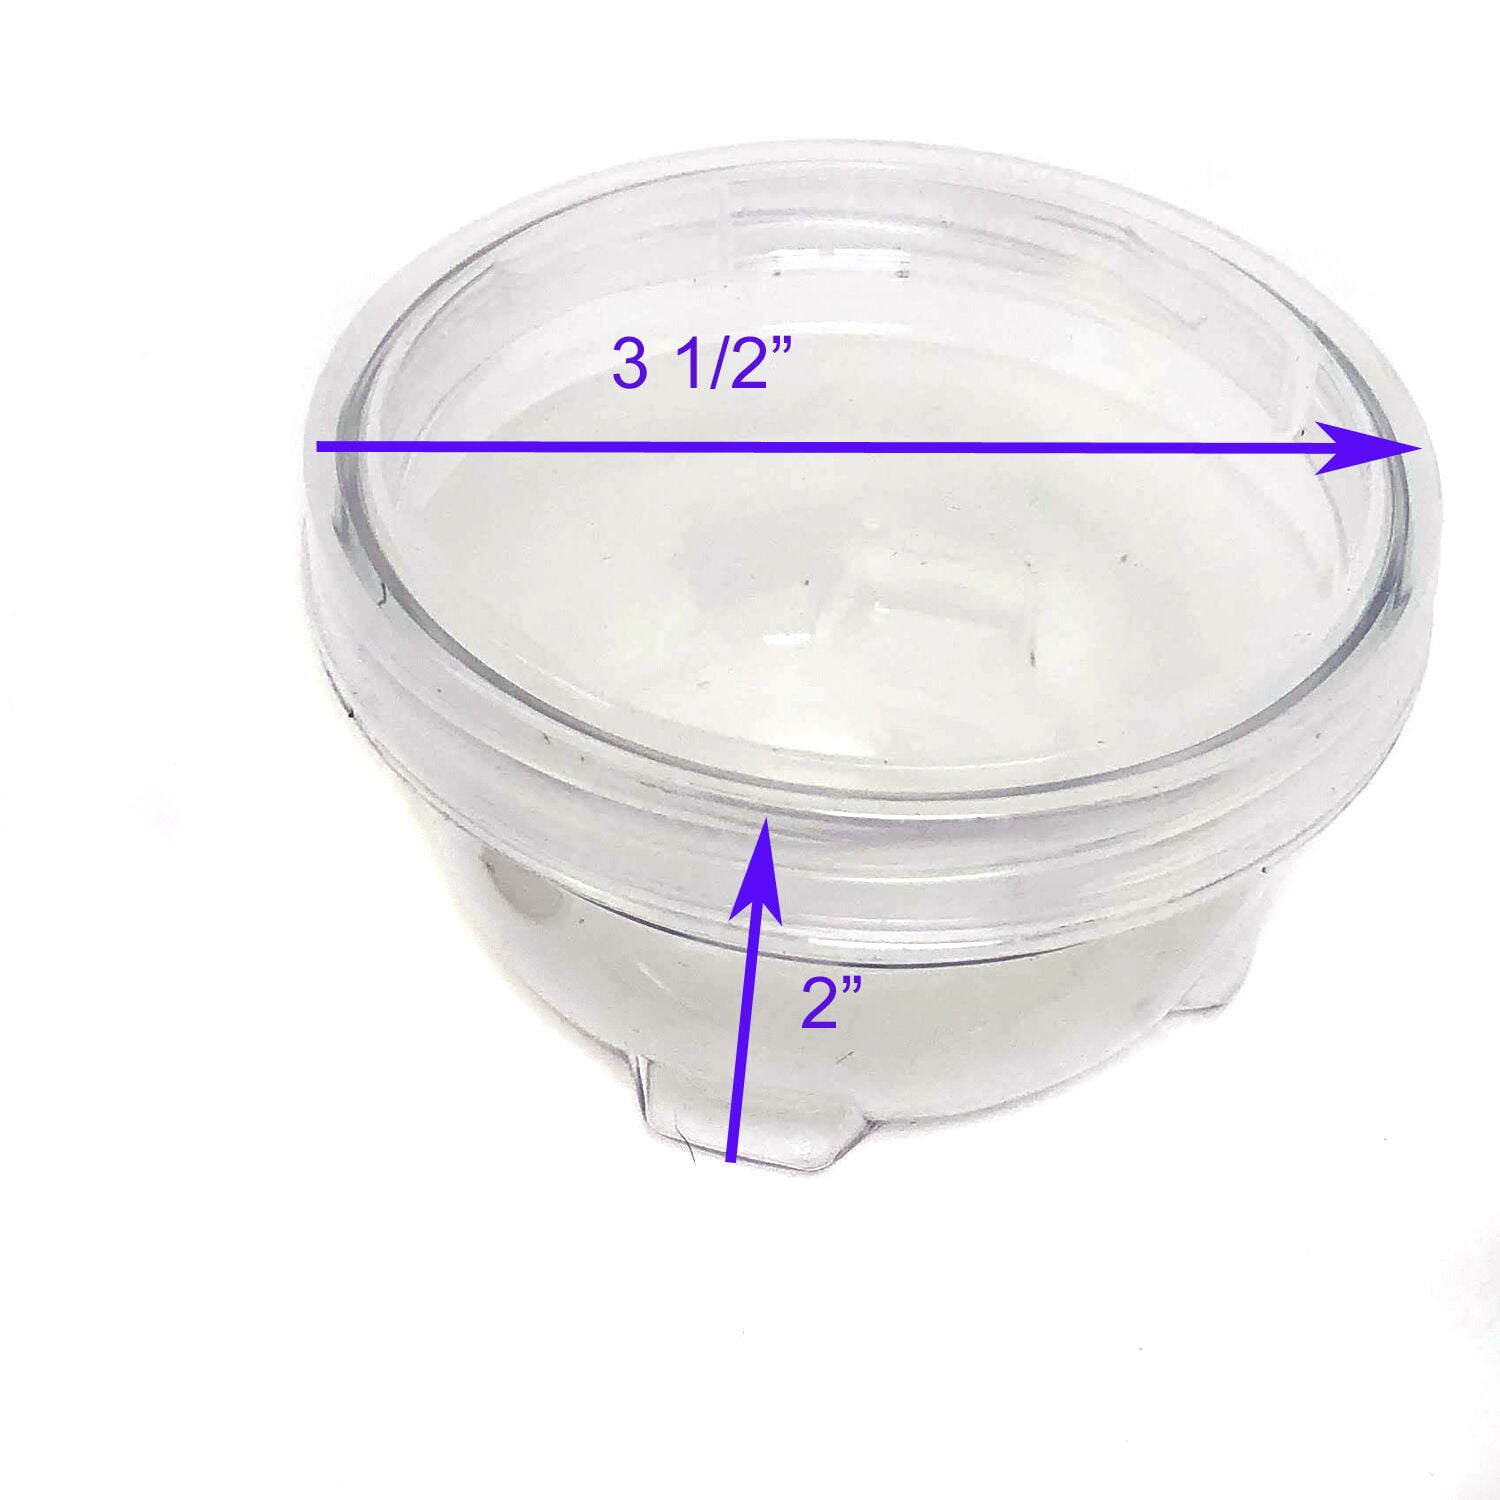 2x 5 Stacking Bead Containers Clear Screw Storage Organizer Box - Clear,  77x27mm 